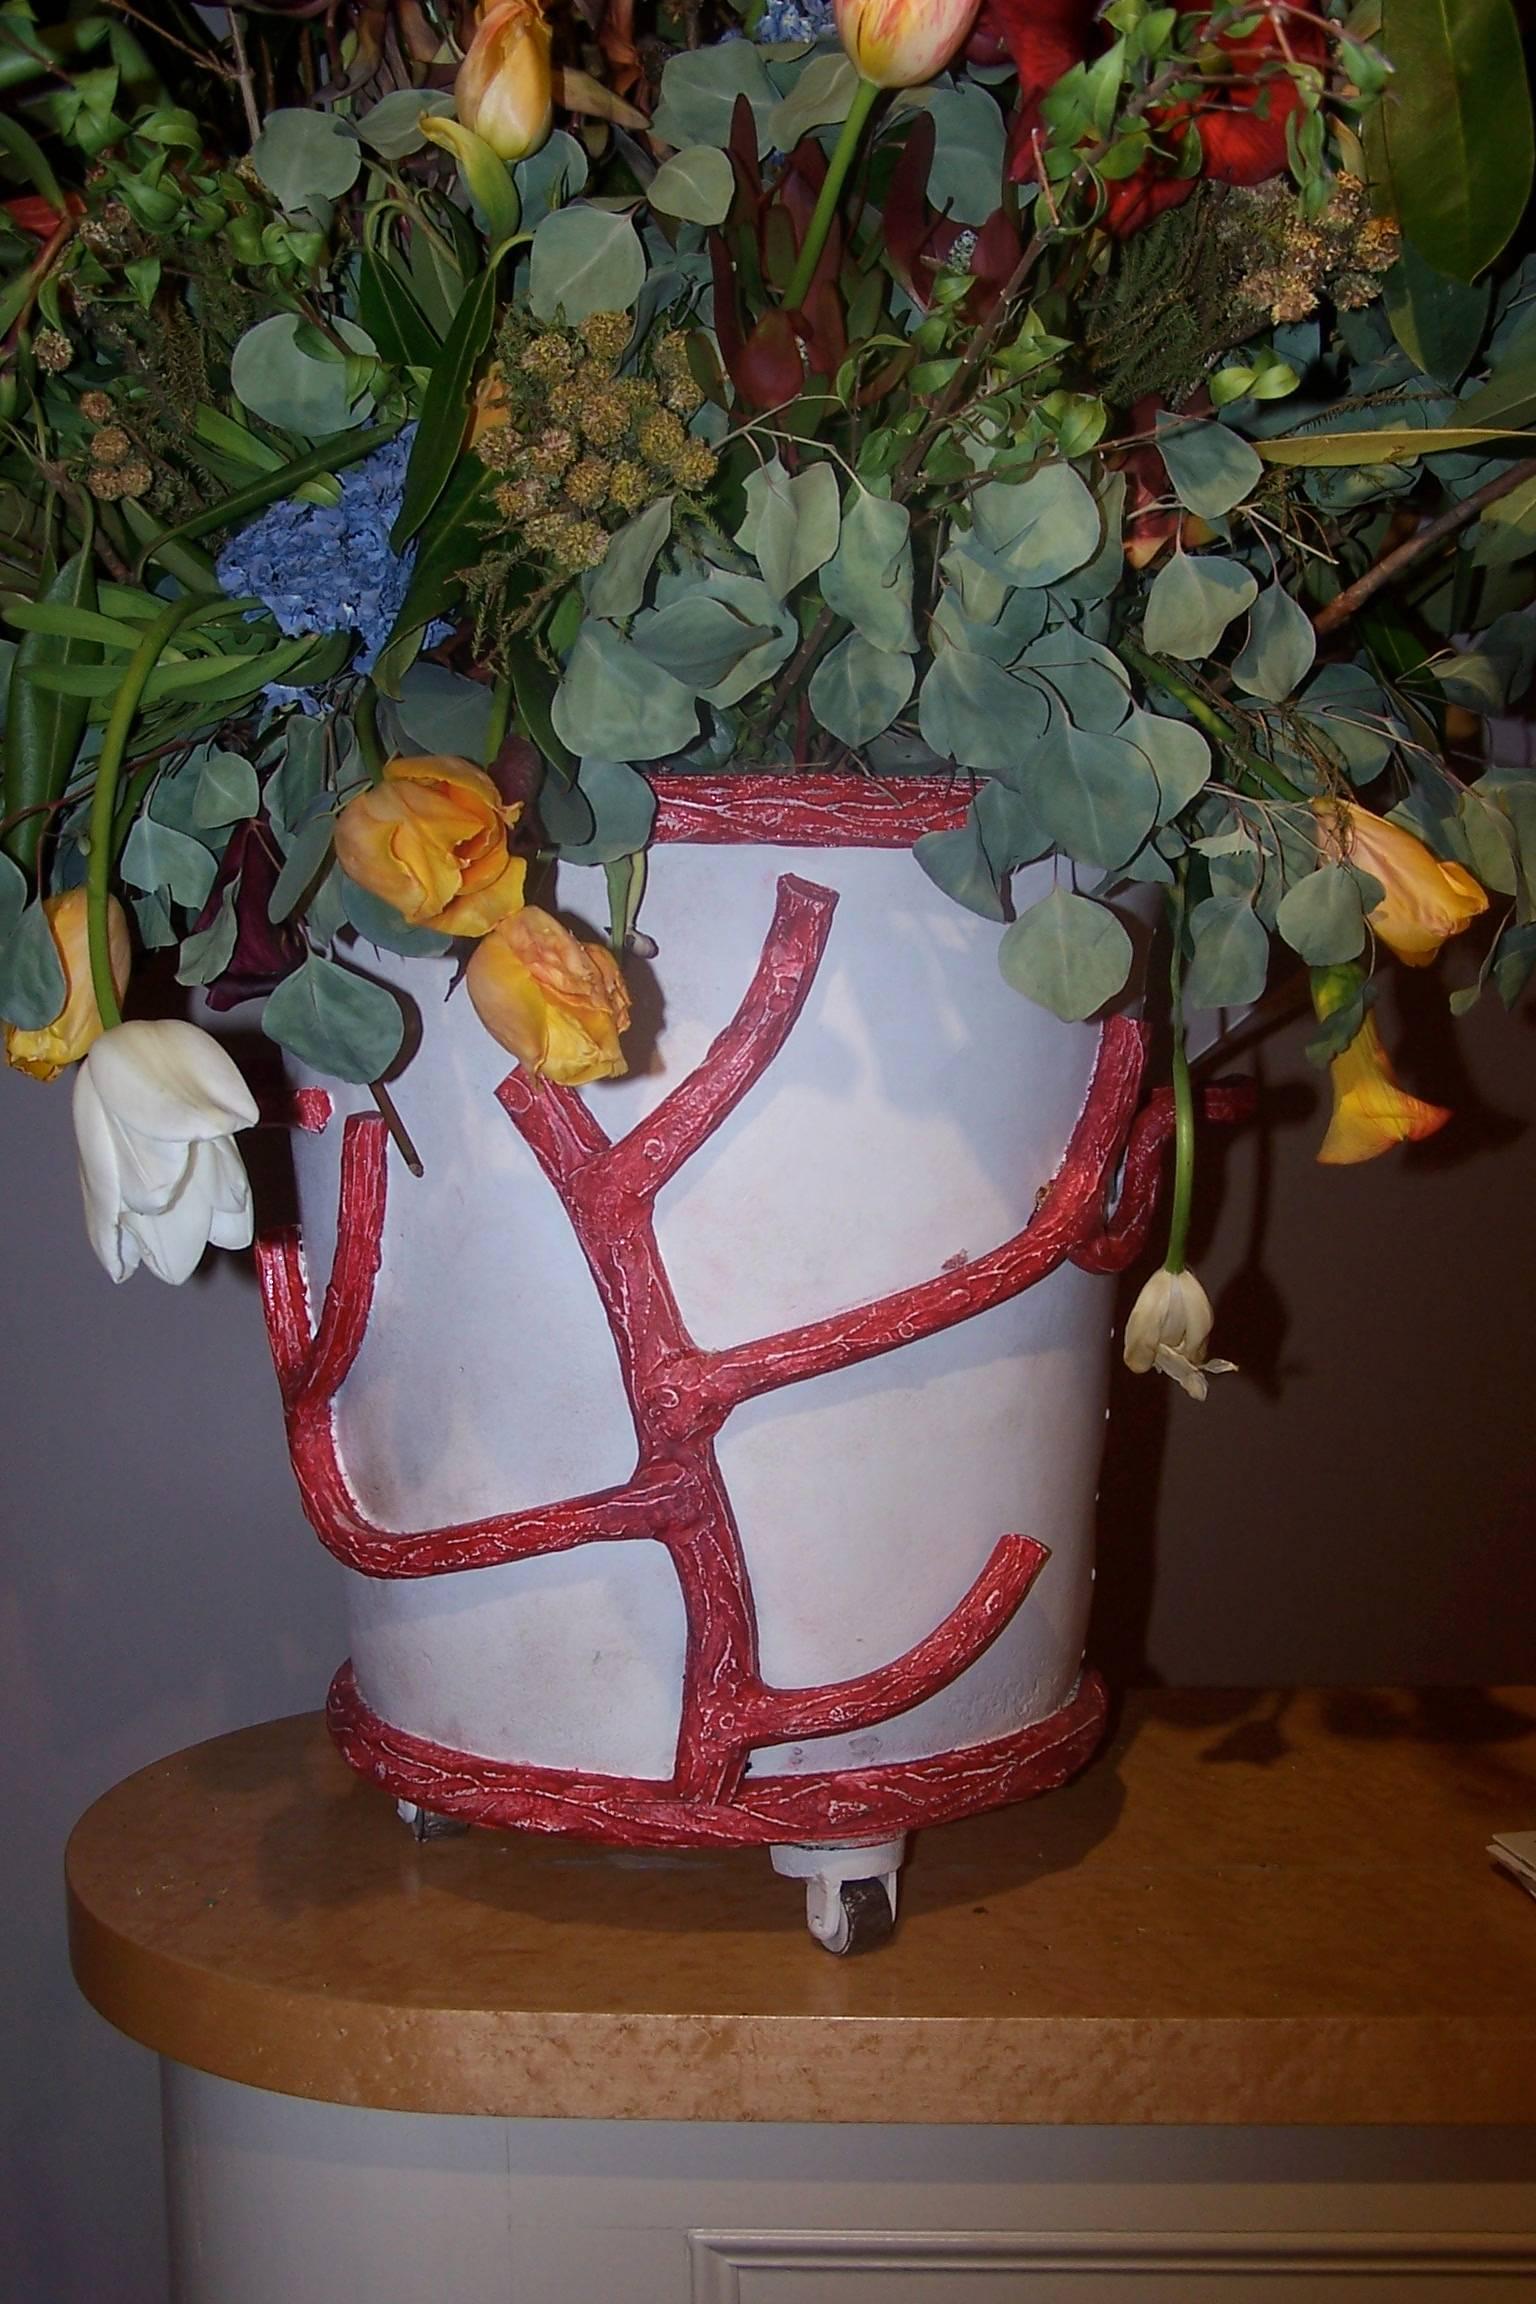 Painted iron and cast iron flower pot on castors.
Fallen branches serving as handles.